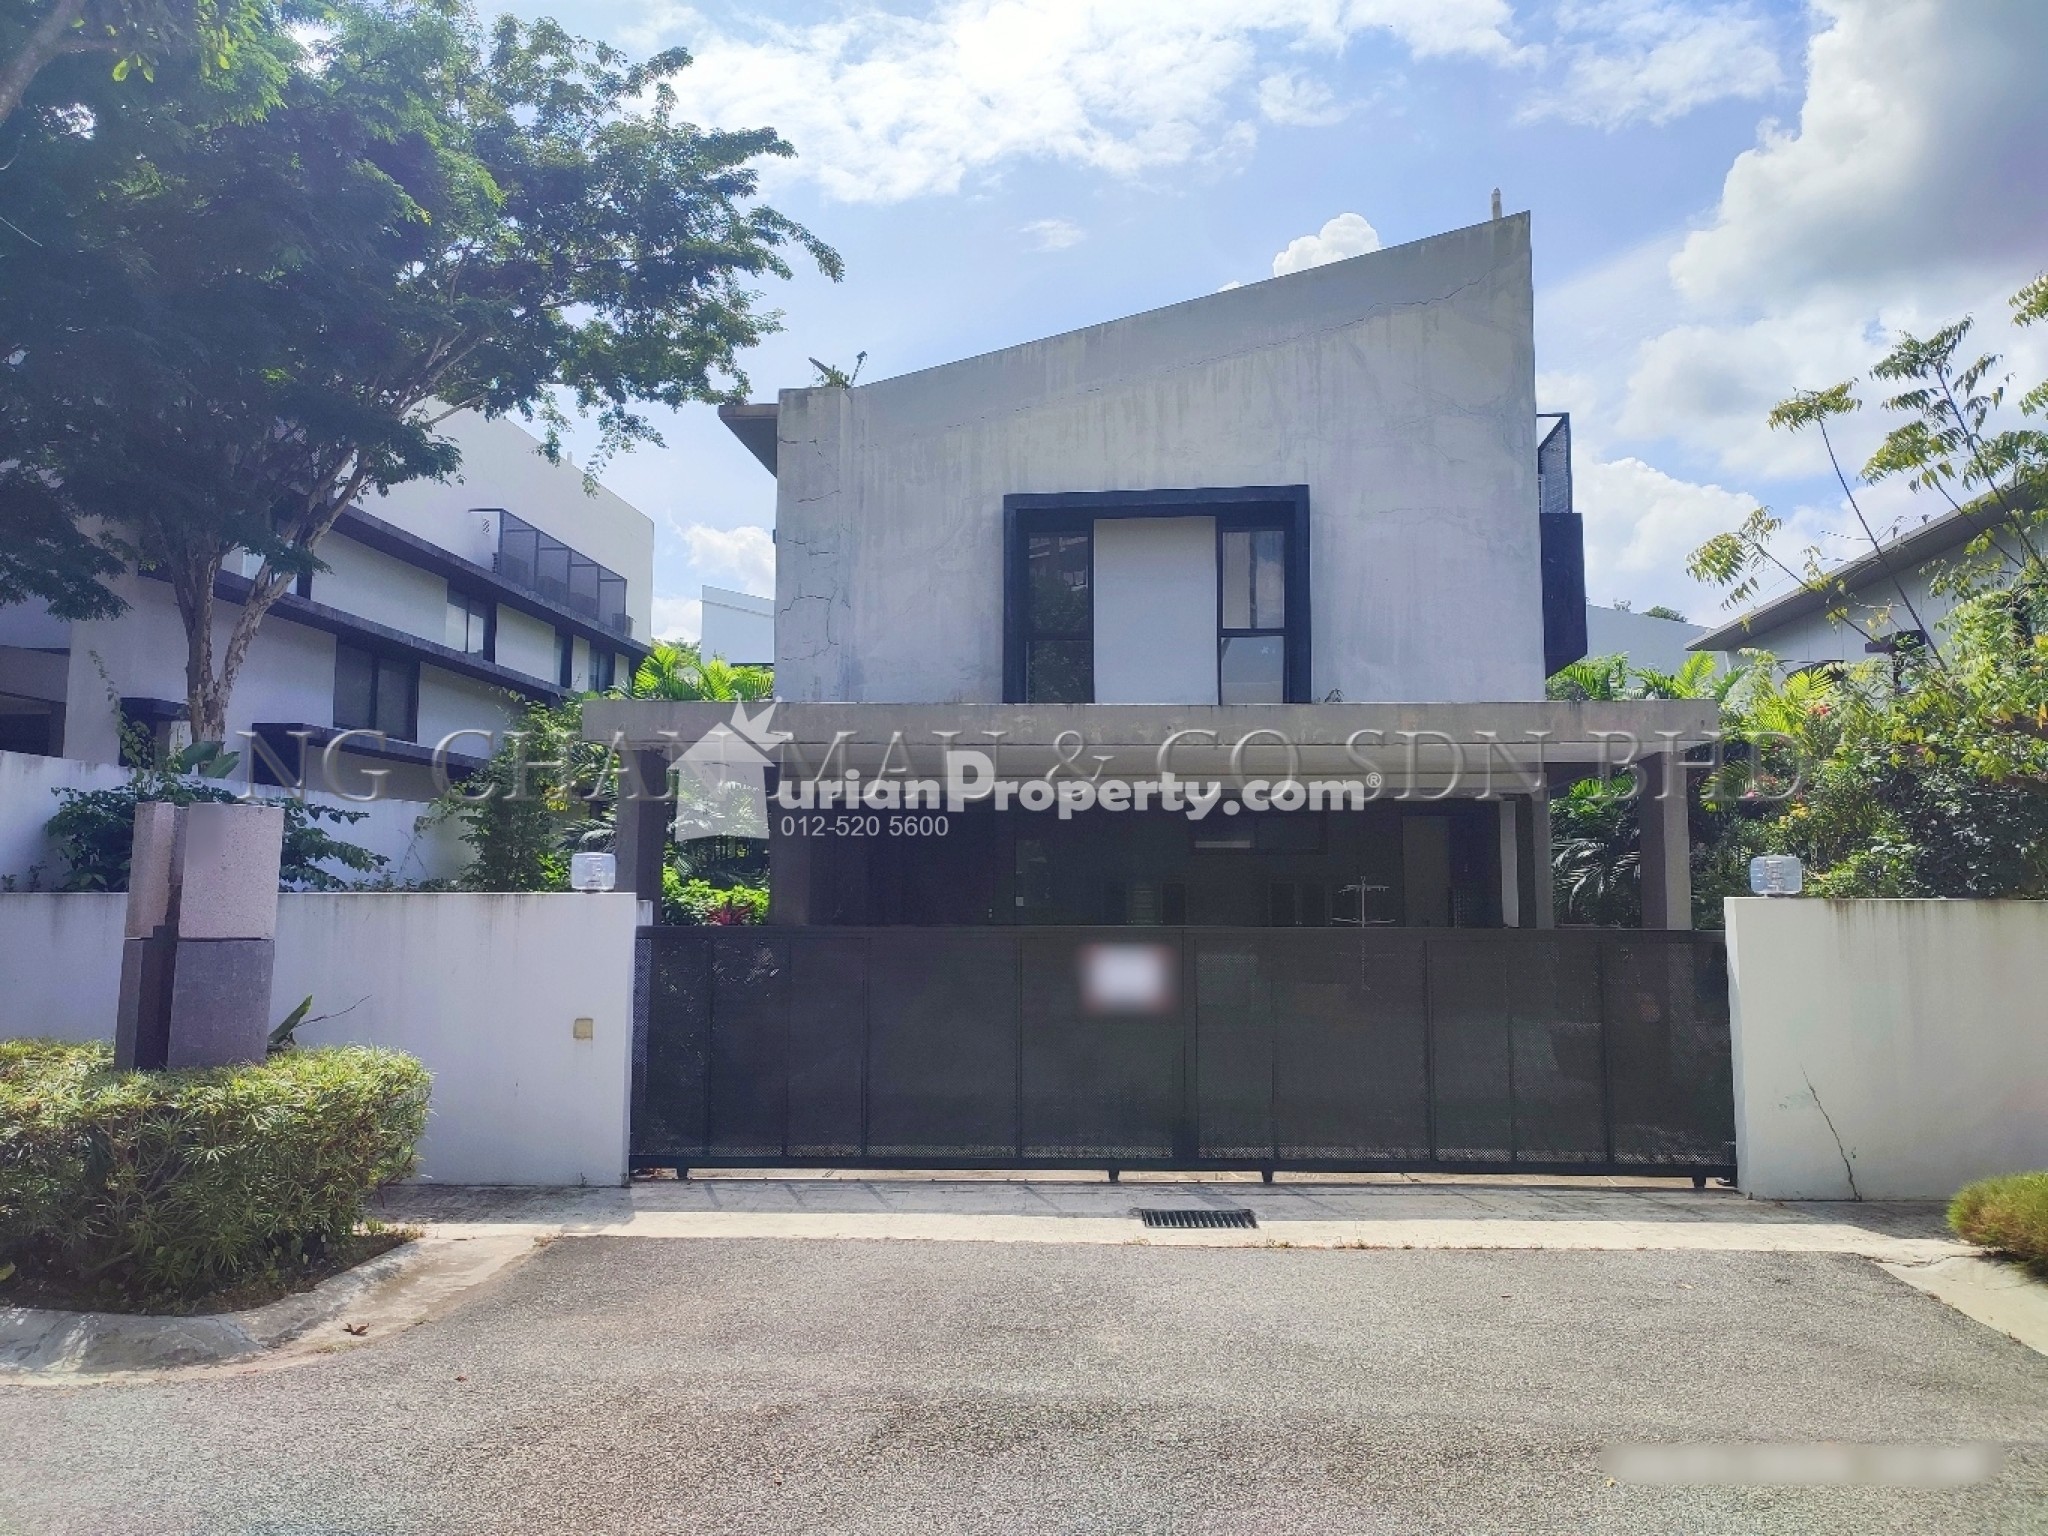 Bungalow House For Auction at 20 Trees Residences